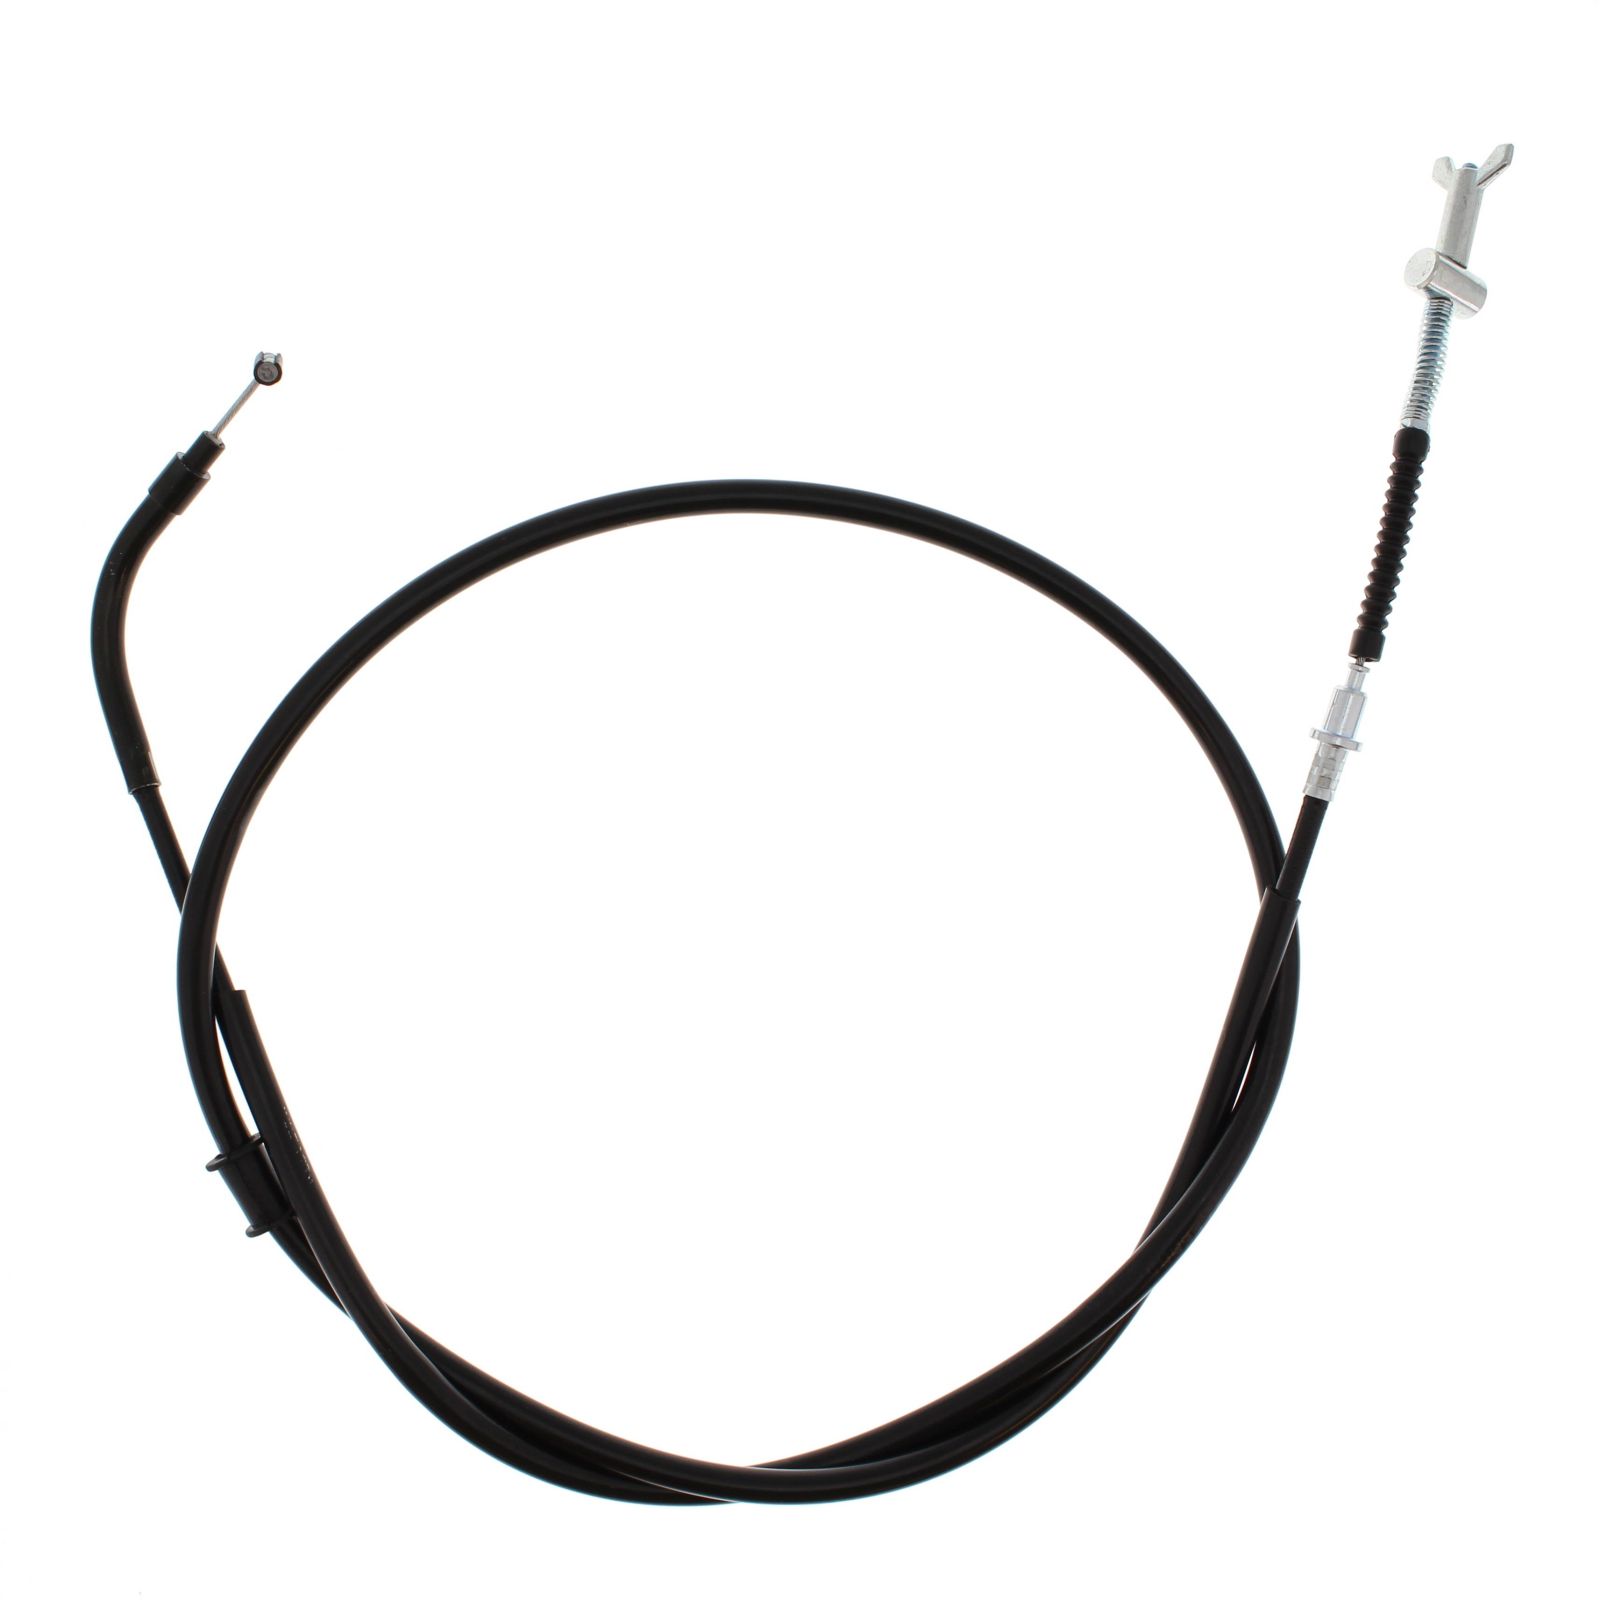 Wrp Brake Cables - WRP454040 image